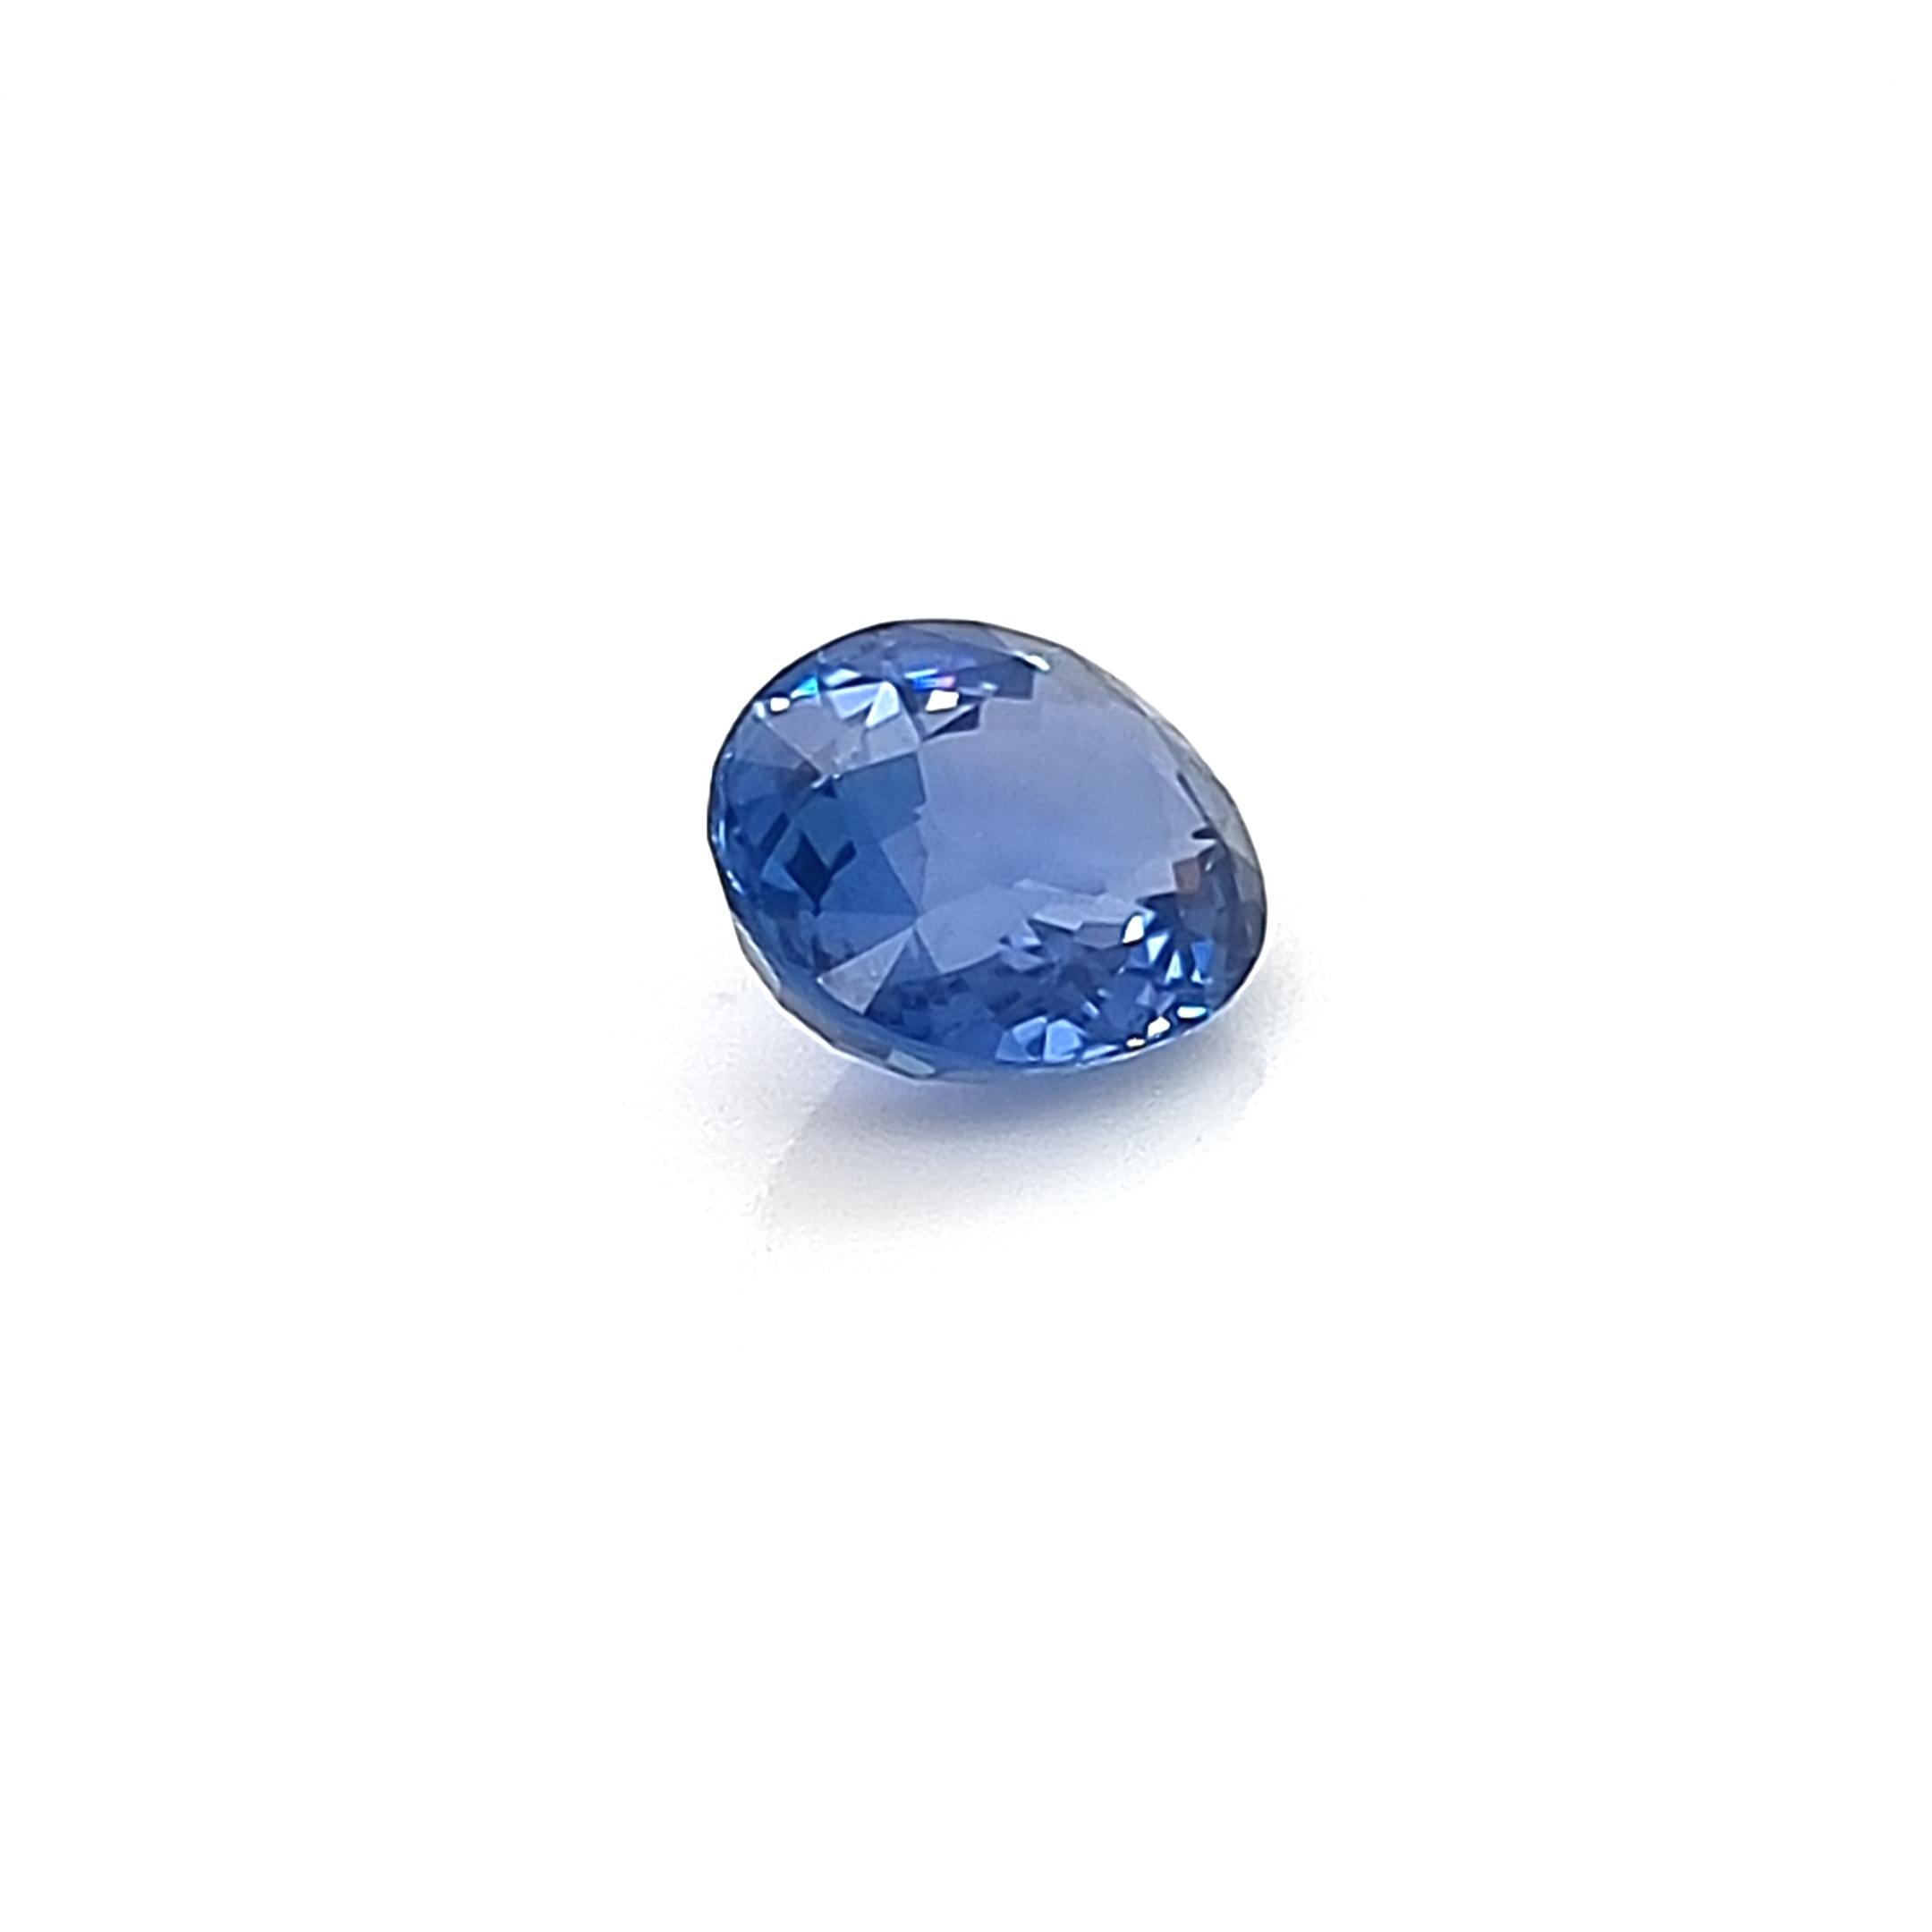 Blue oval sapphire from Sri Lanka.
11.58 x 9.22 x 5.44 mm
Certified by GIA.

Heat treatment.

Weight - 5.18 carats.

Ideally can be transformed into a ring or a pendant.